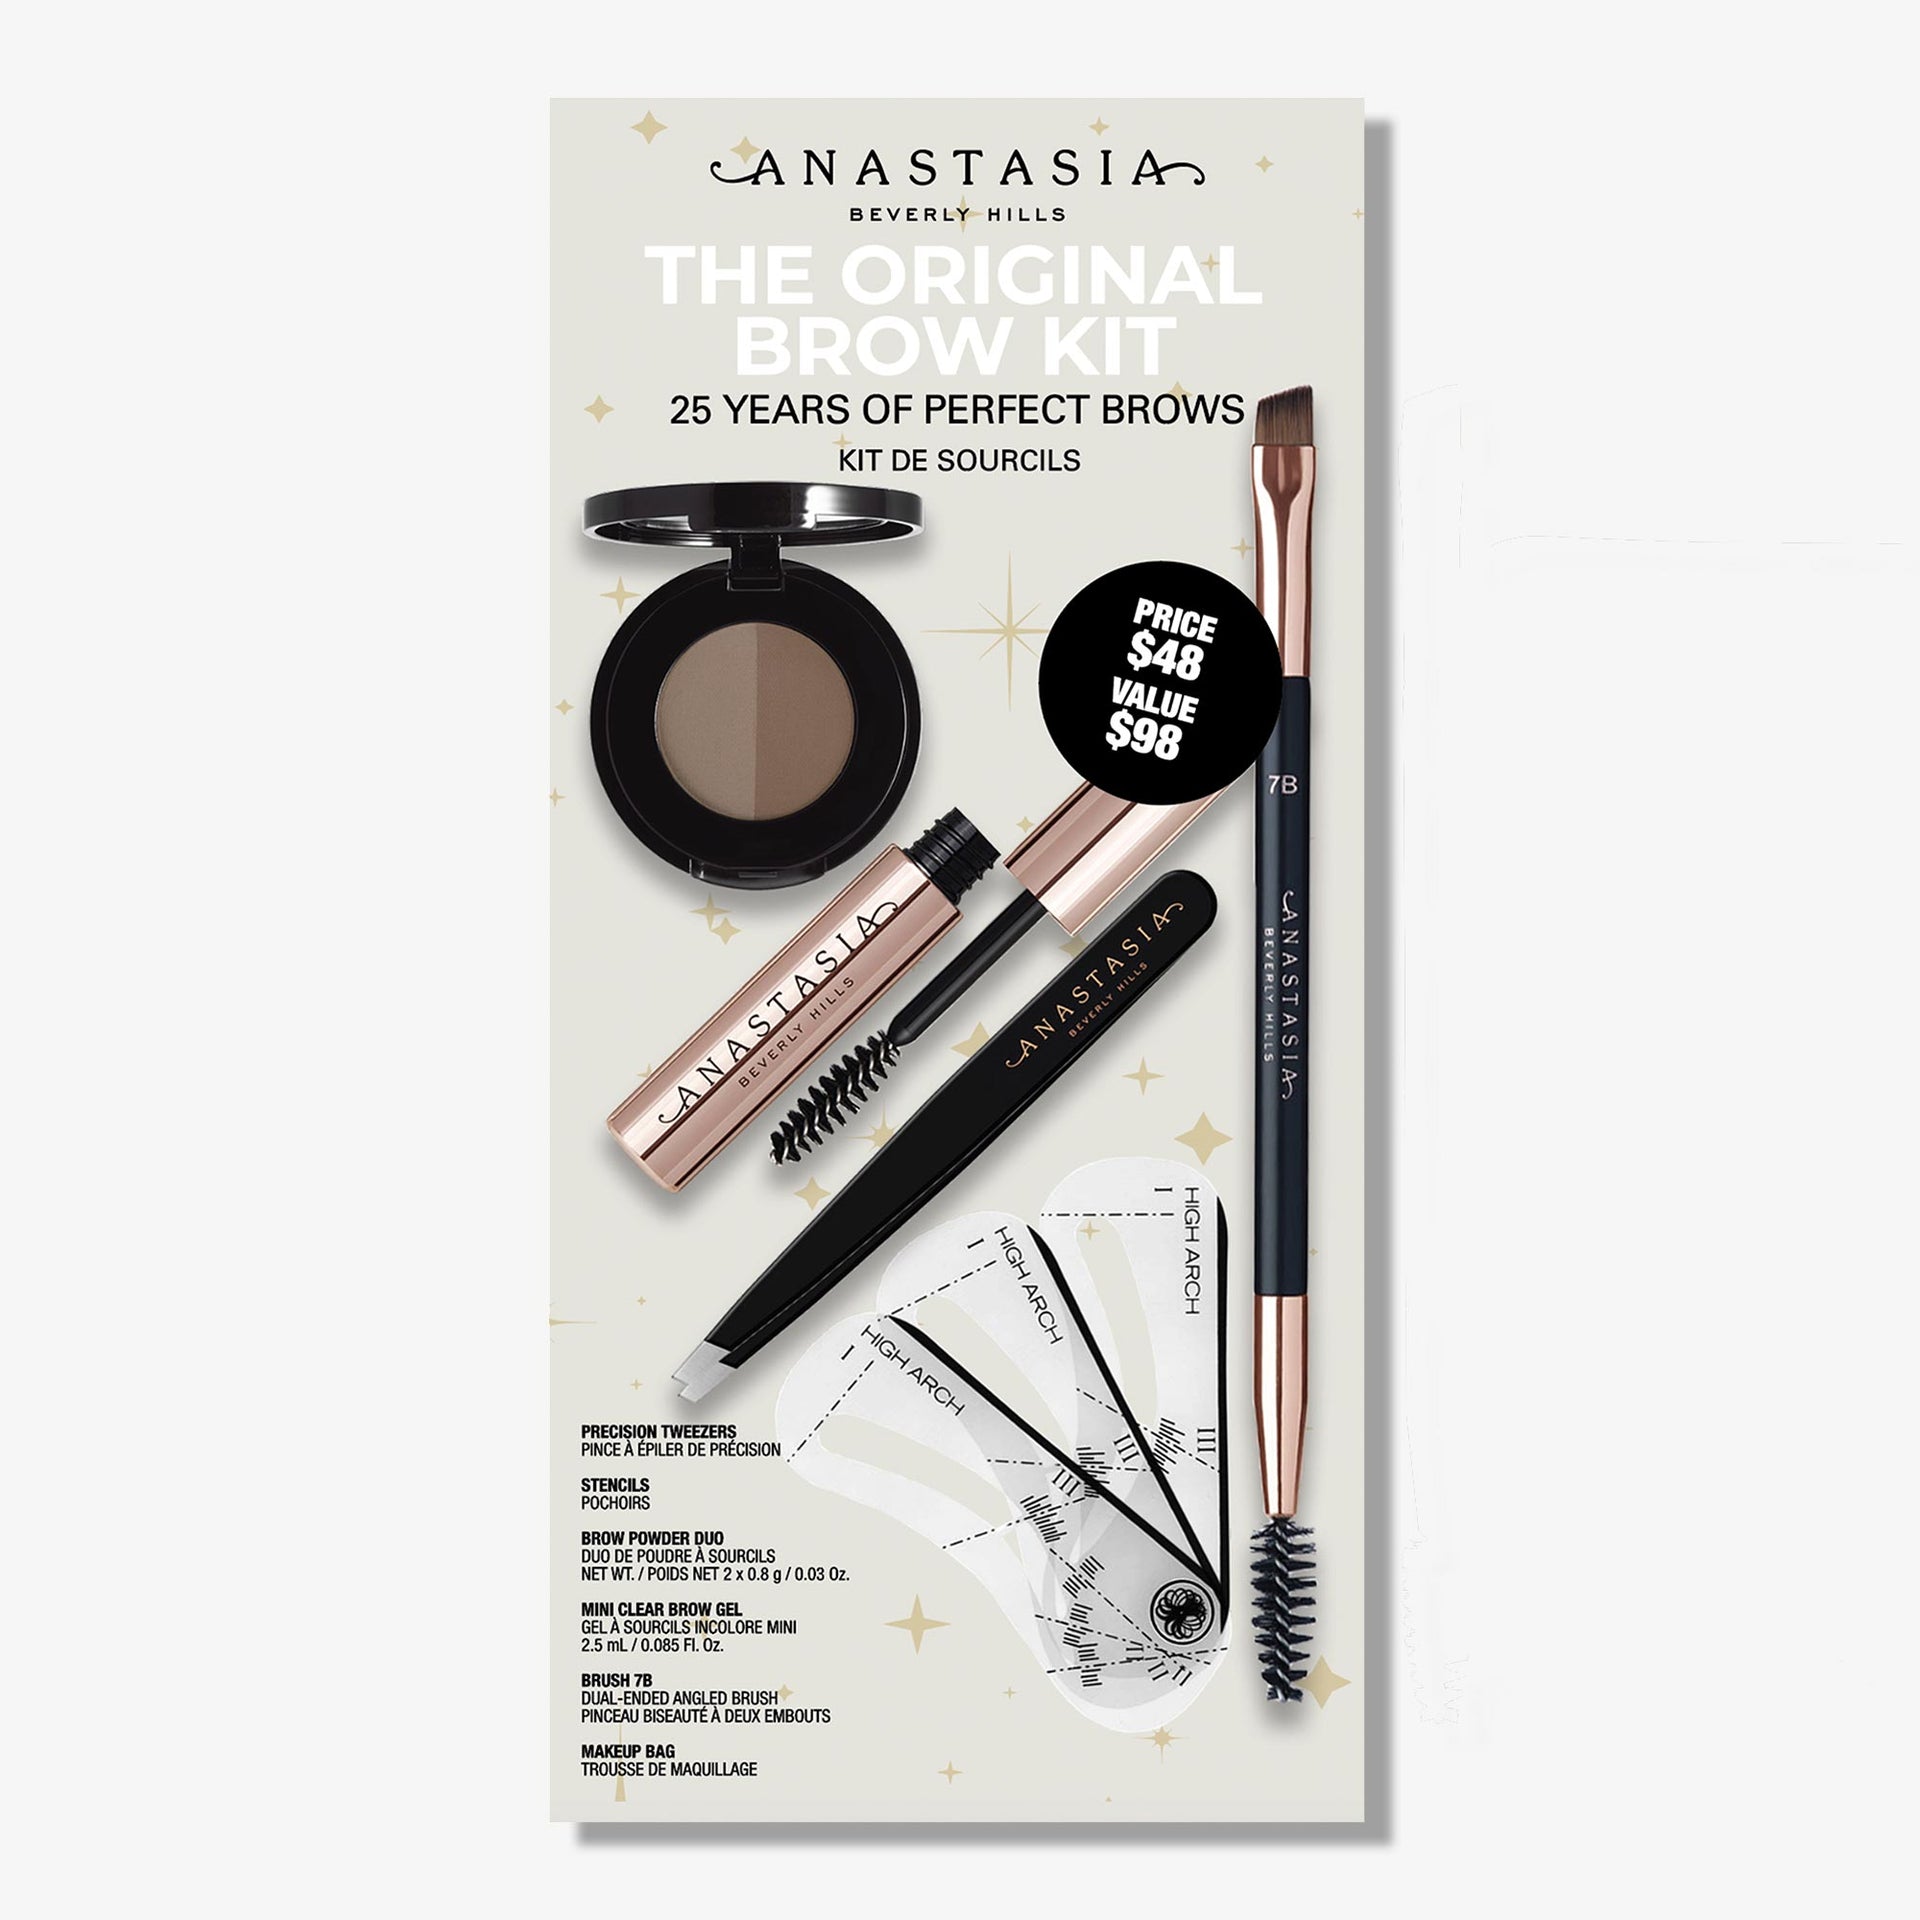 Soft Brown |The Original Brow Kit: 25 Years of Perfect Brows - Soft Brown